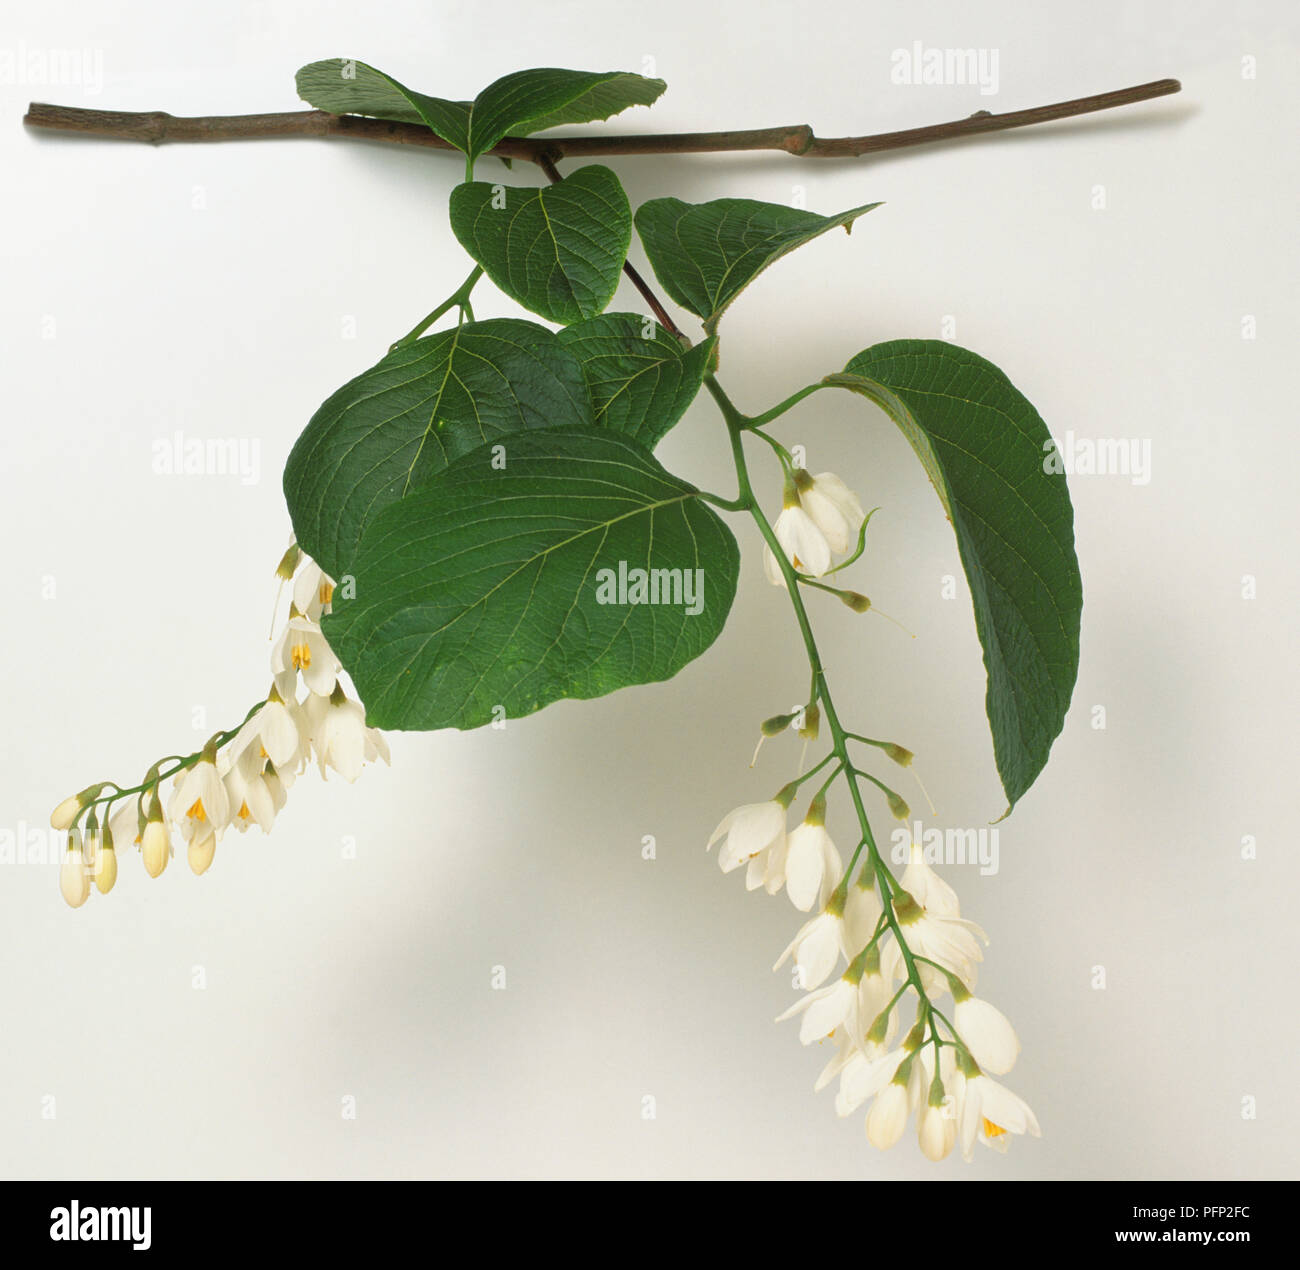 Styracaceae, Styrax obassia, grey-brown stem, large rounded leaves, and hanging loose racemes of white flowers with yellow anthers. Stock Photo